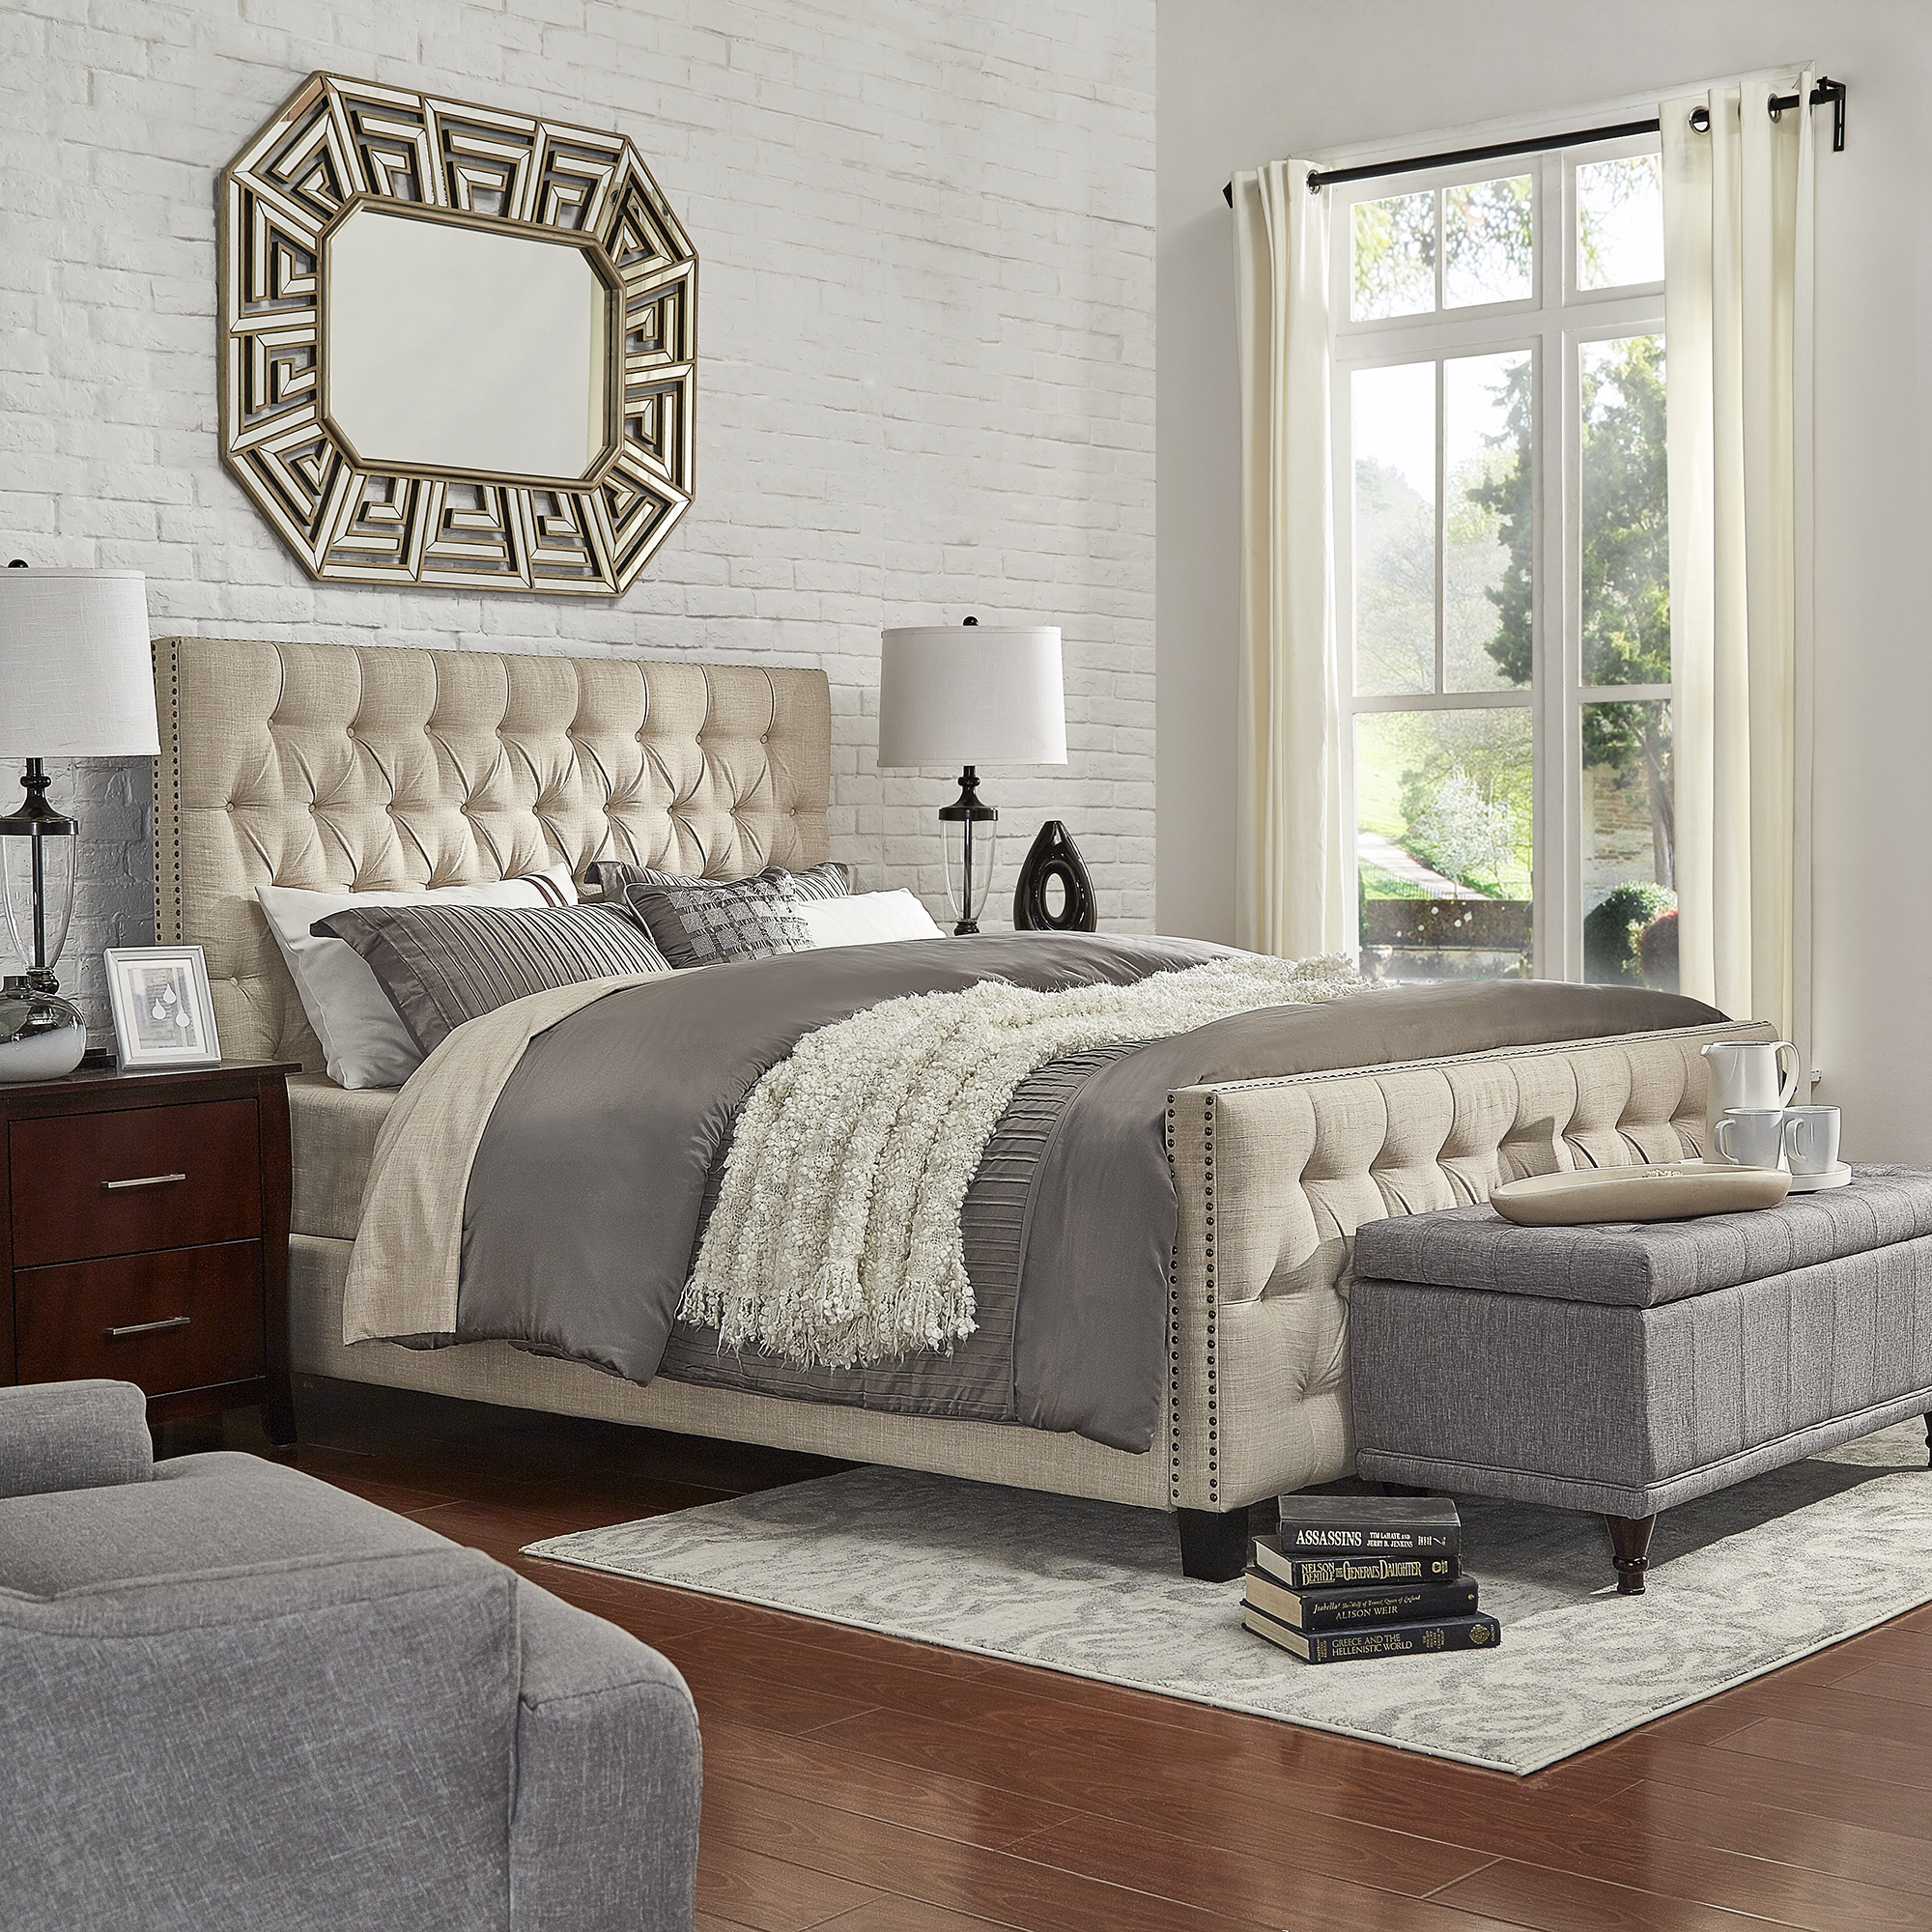 Tufted Nailhead Chesterfield Platform Bed with Footboard